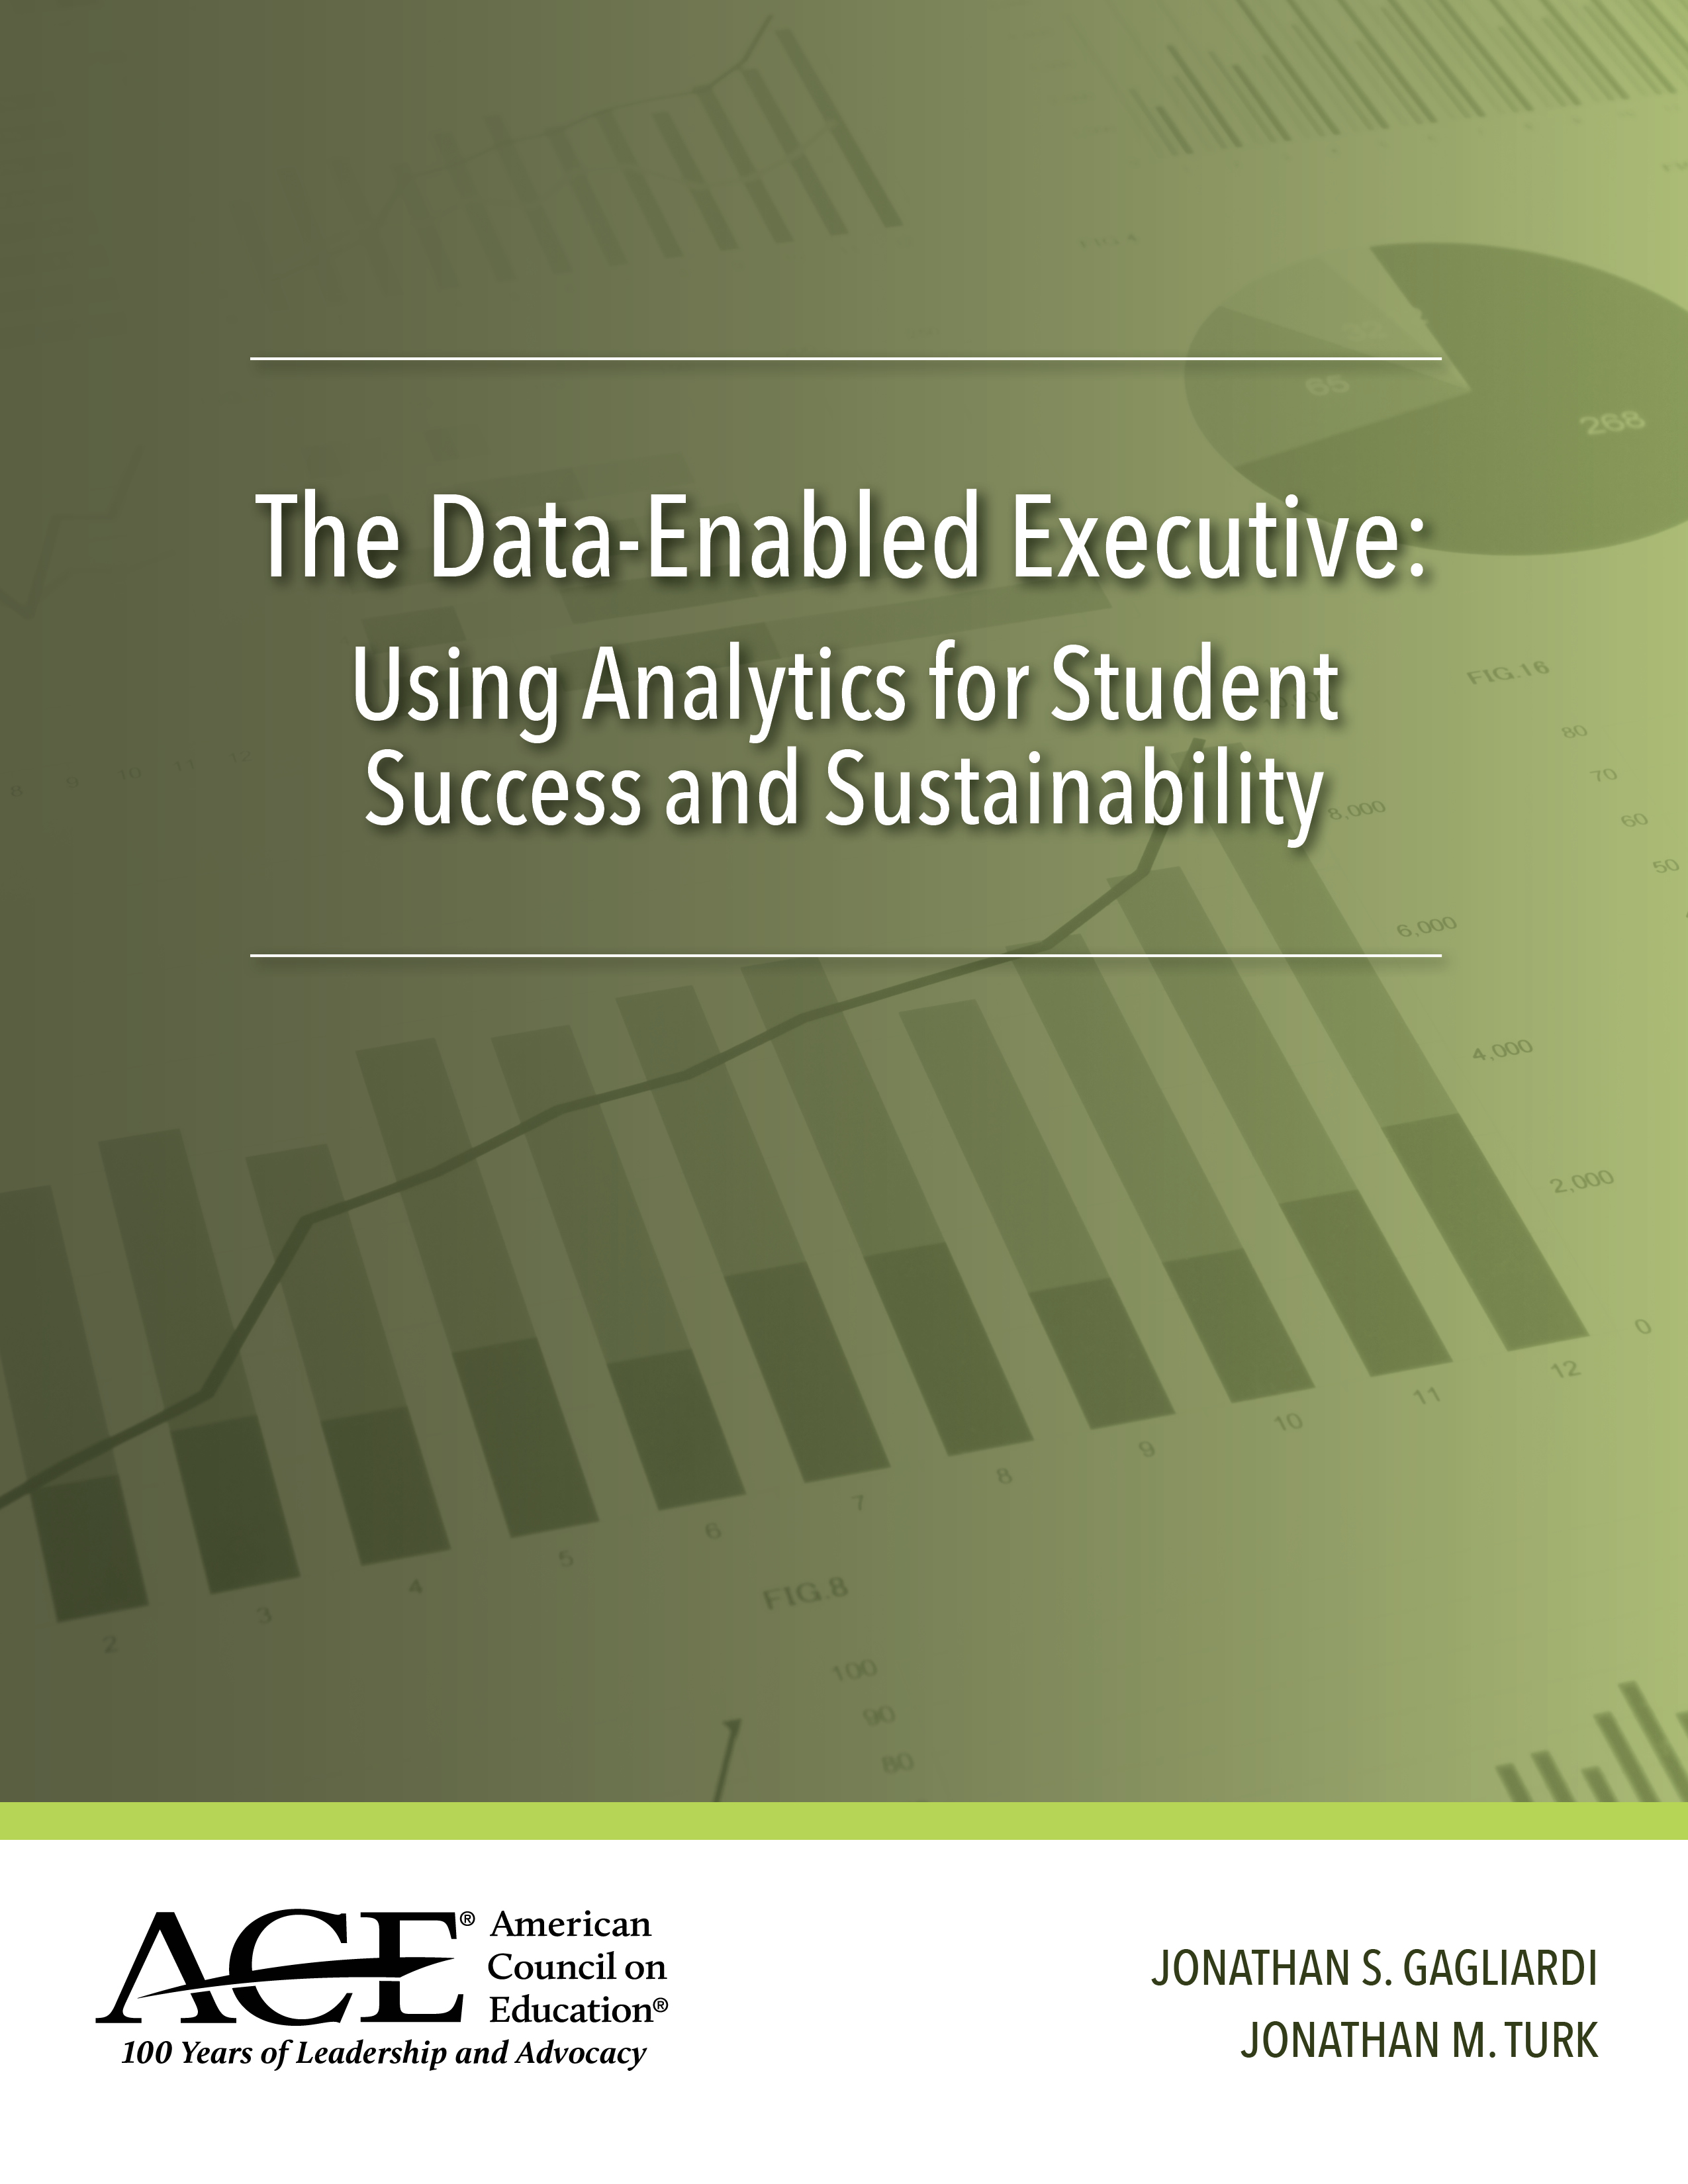 The Data-Enabled Executive: Using Analytics for Student Success and Sustainability